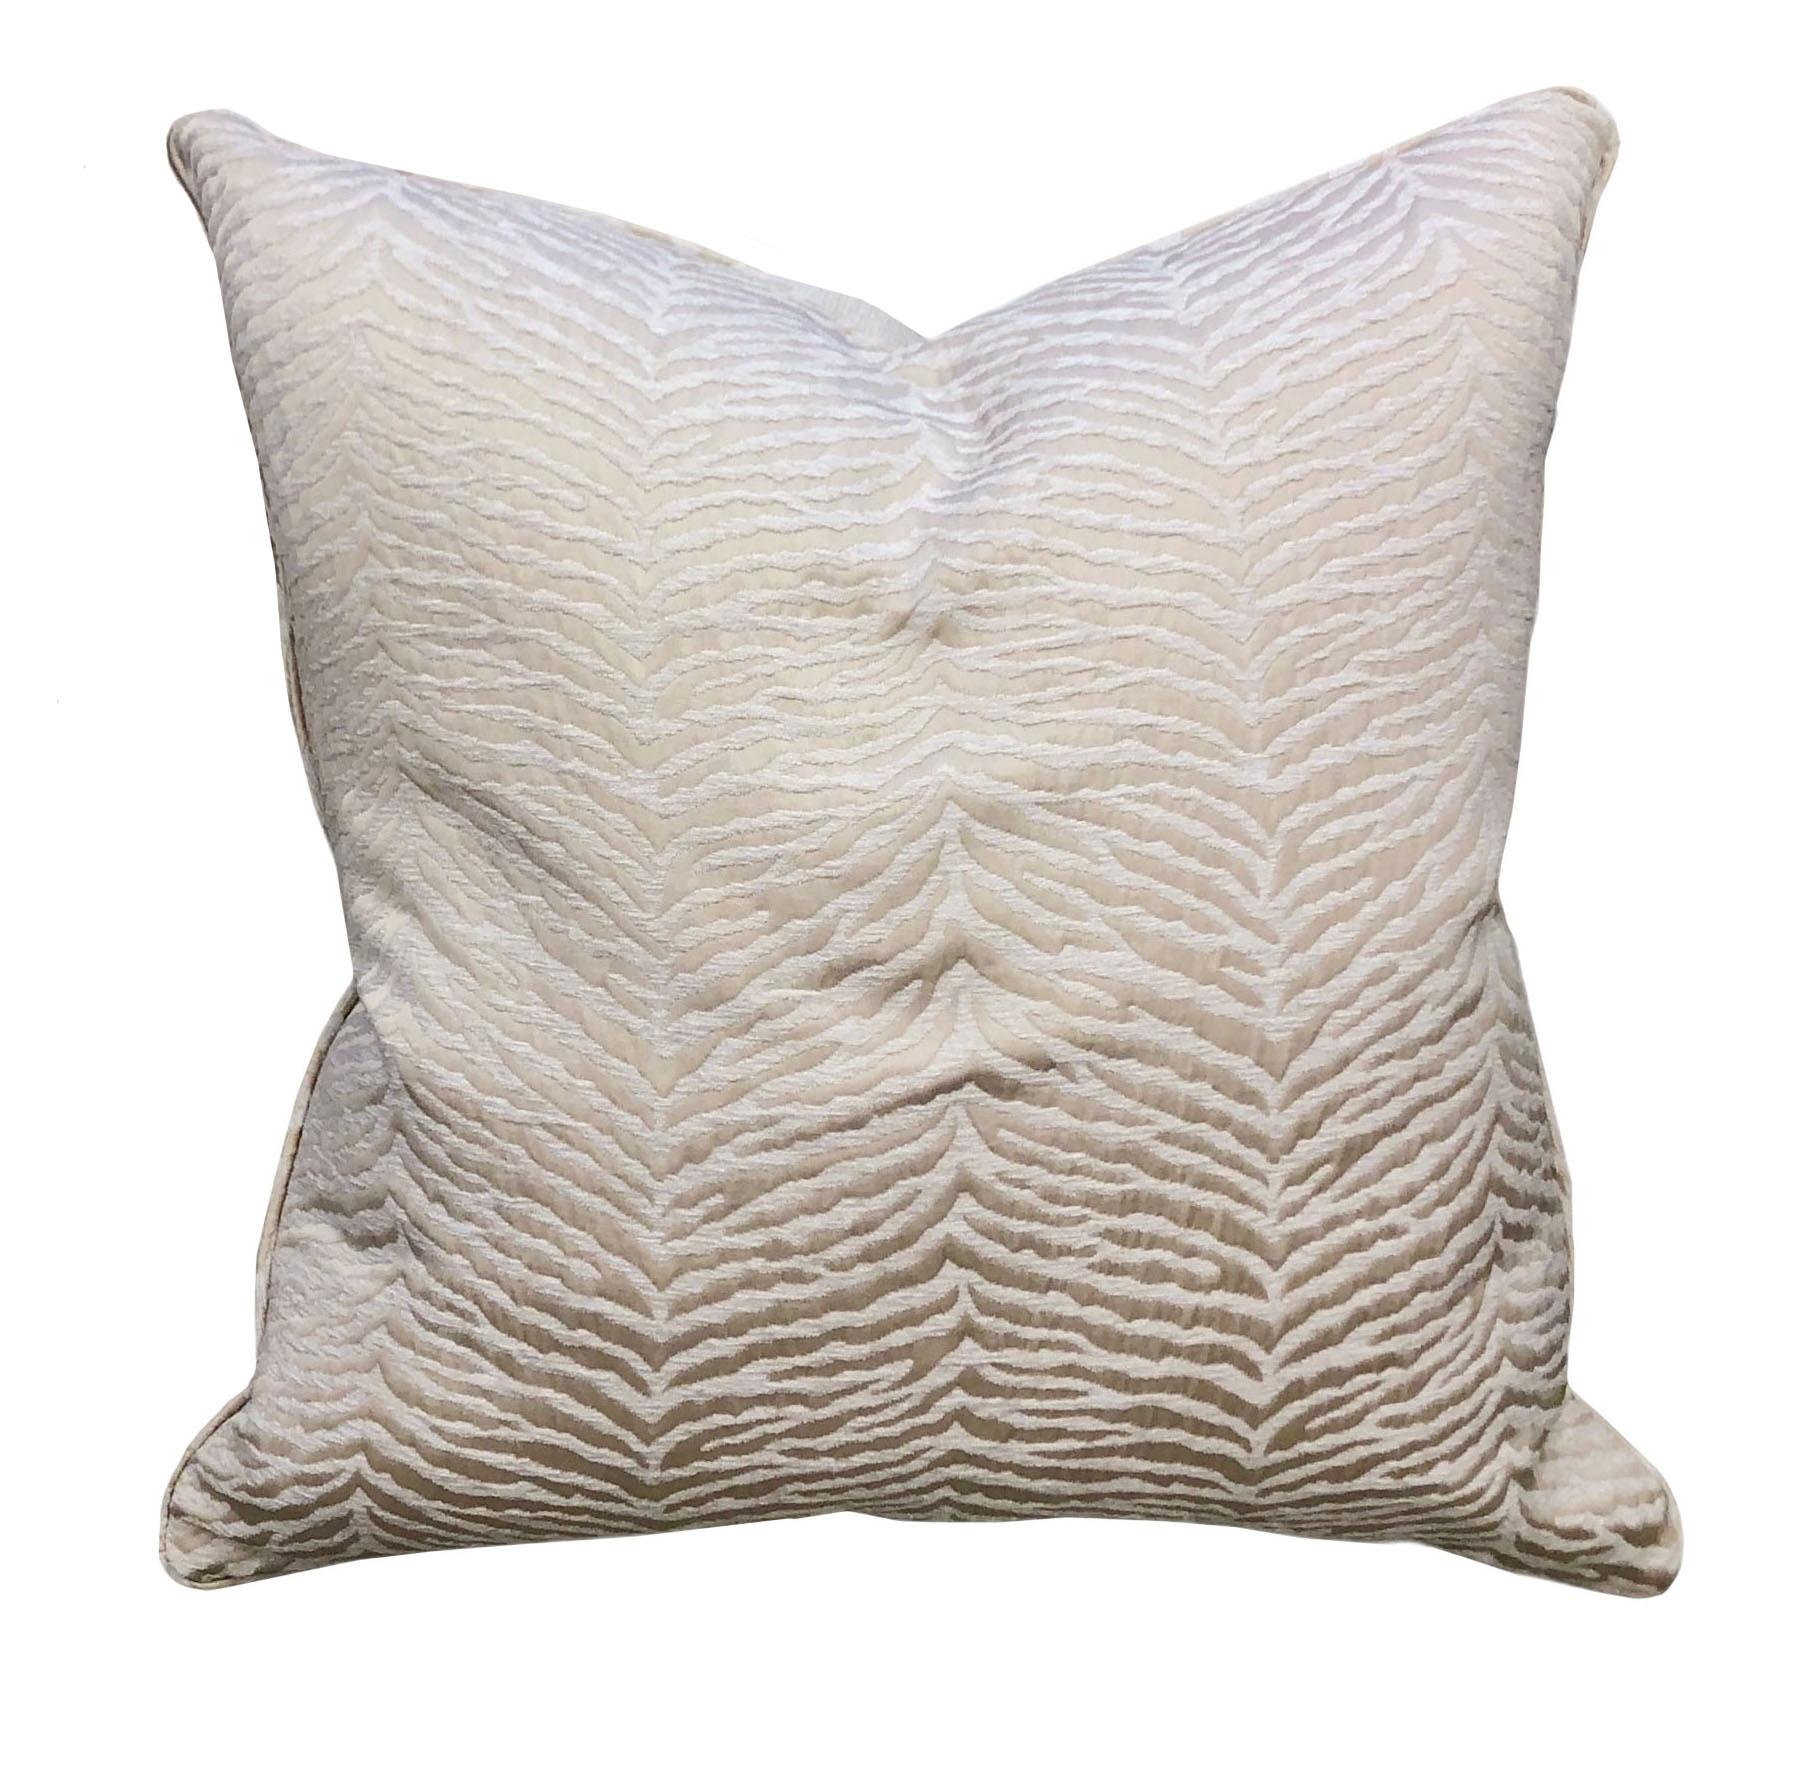 Italian Scalamandré White Tiger Pillows, a Pair For Sale